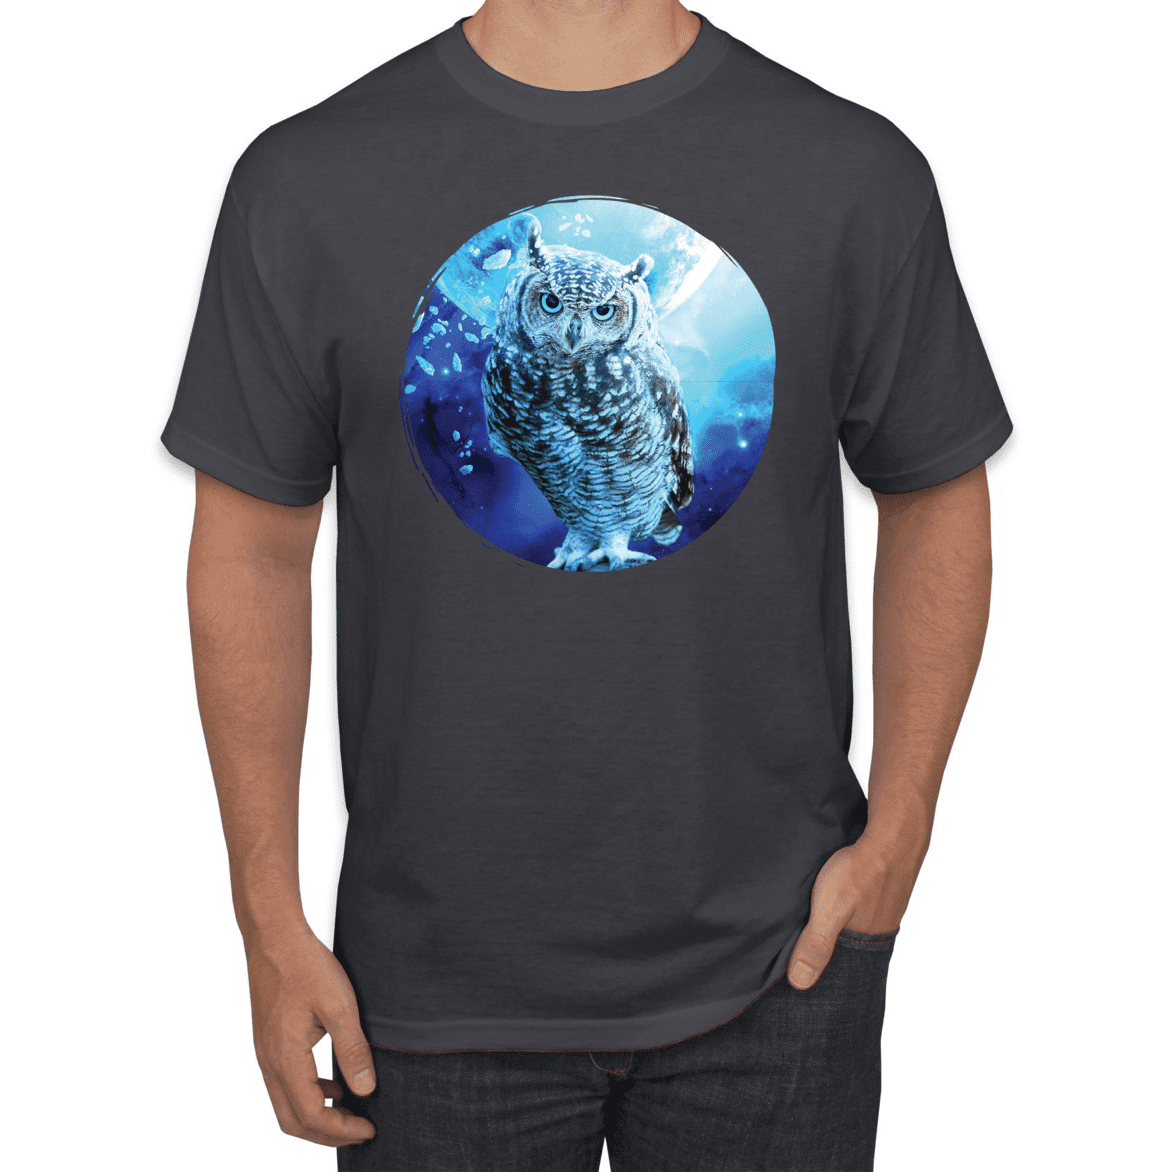 Owl in the Snow Graphic T-Shirt